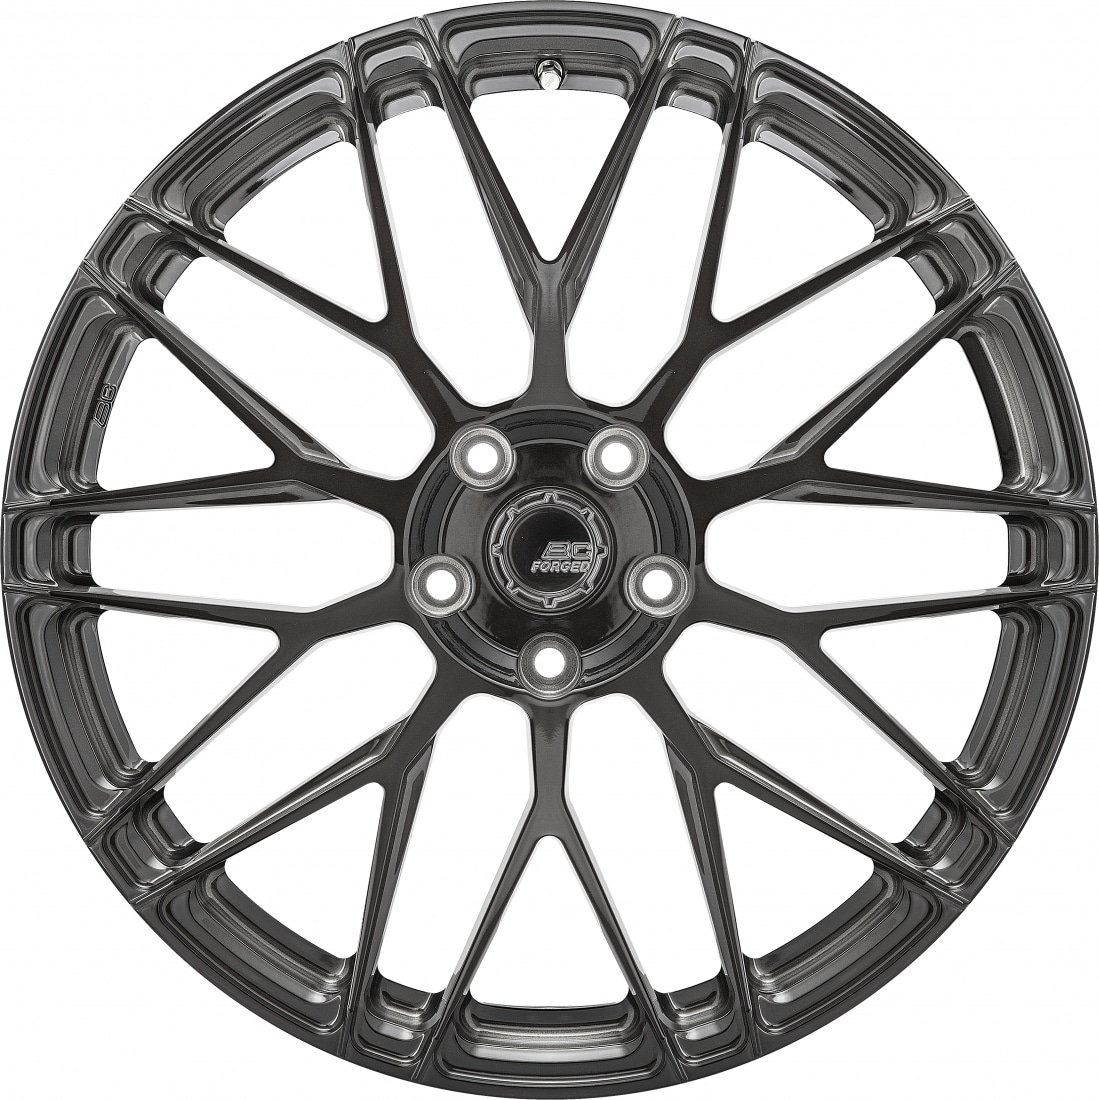 2020-23 BC Forged EH308 Wheels for C8 Corvette, Set of 4